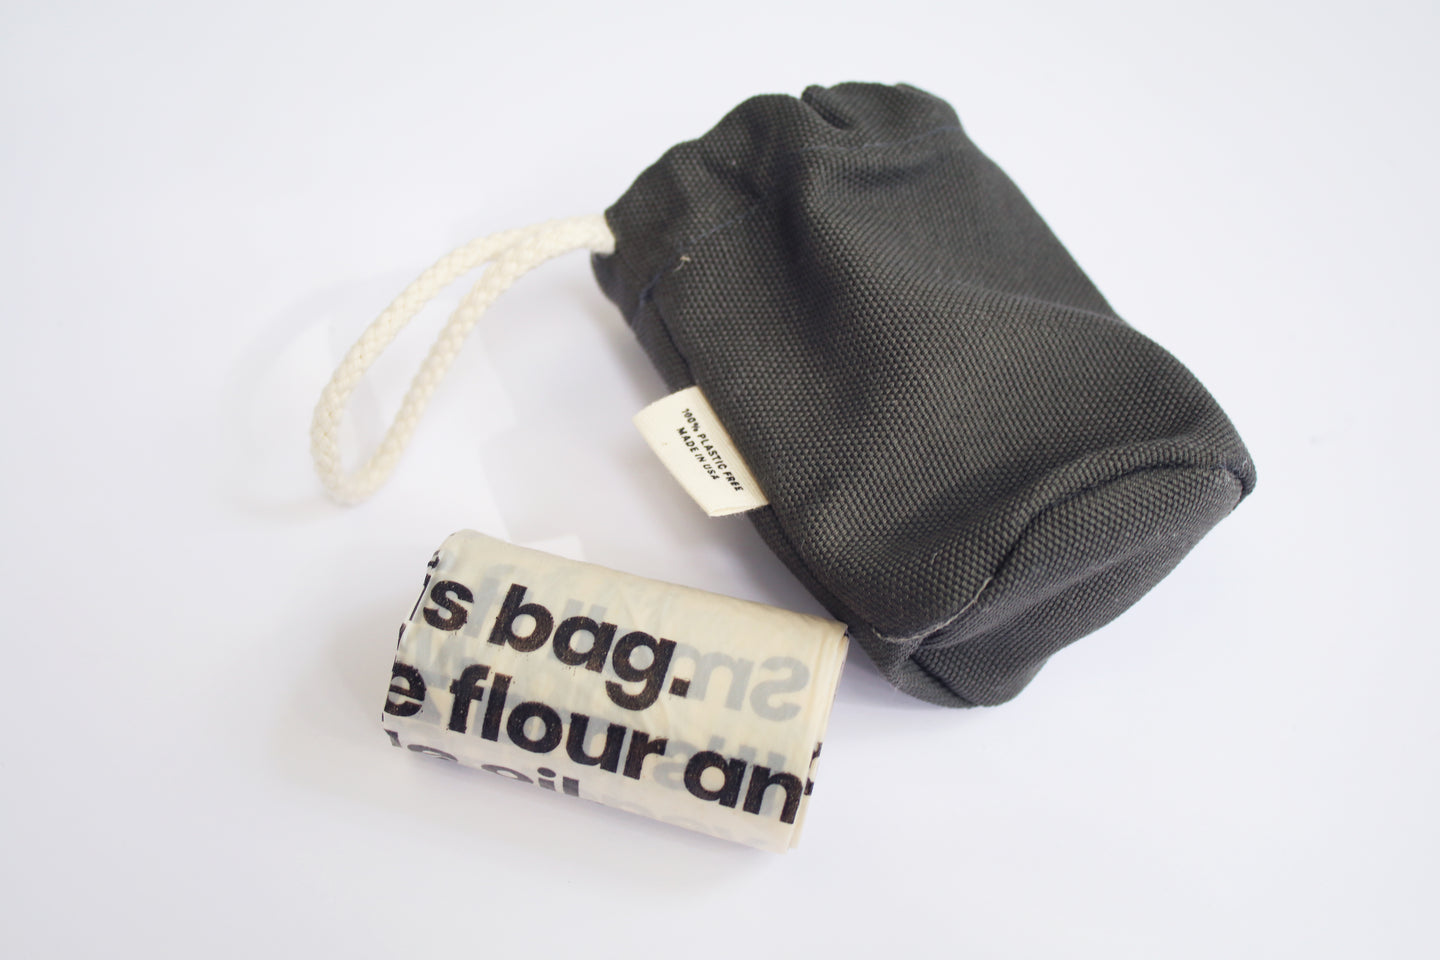 an up close look at a doggie poop bag holder next to the roll of baggies that go inside. The pop bag holder is a gray color. It has a soft cotton handle and a small tag on the side that says 